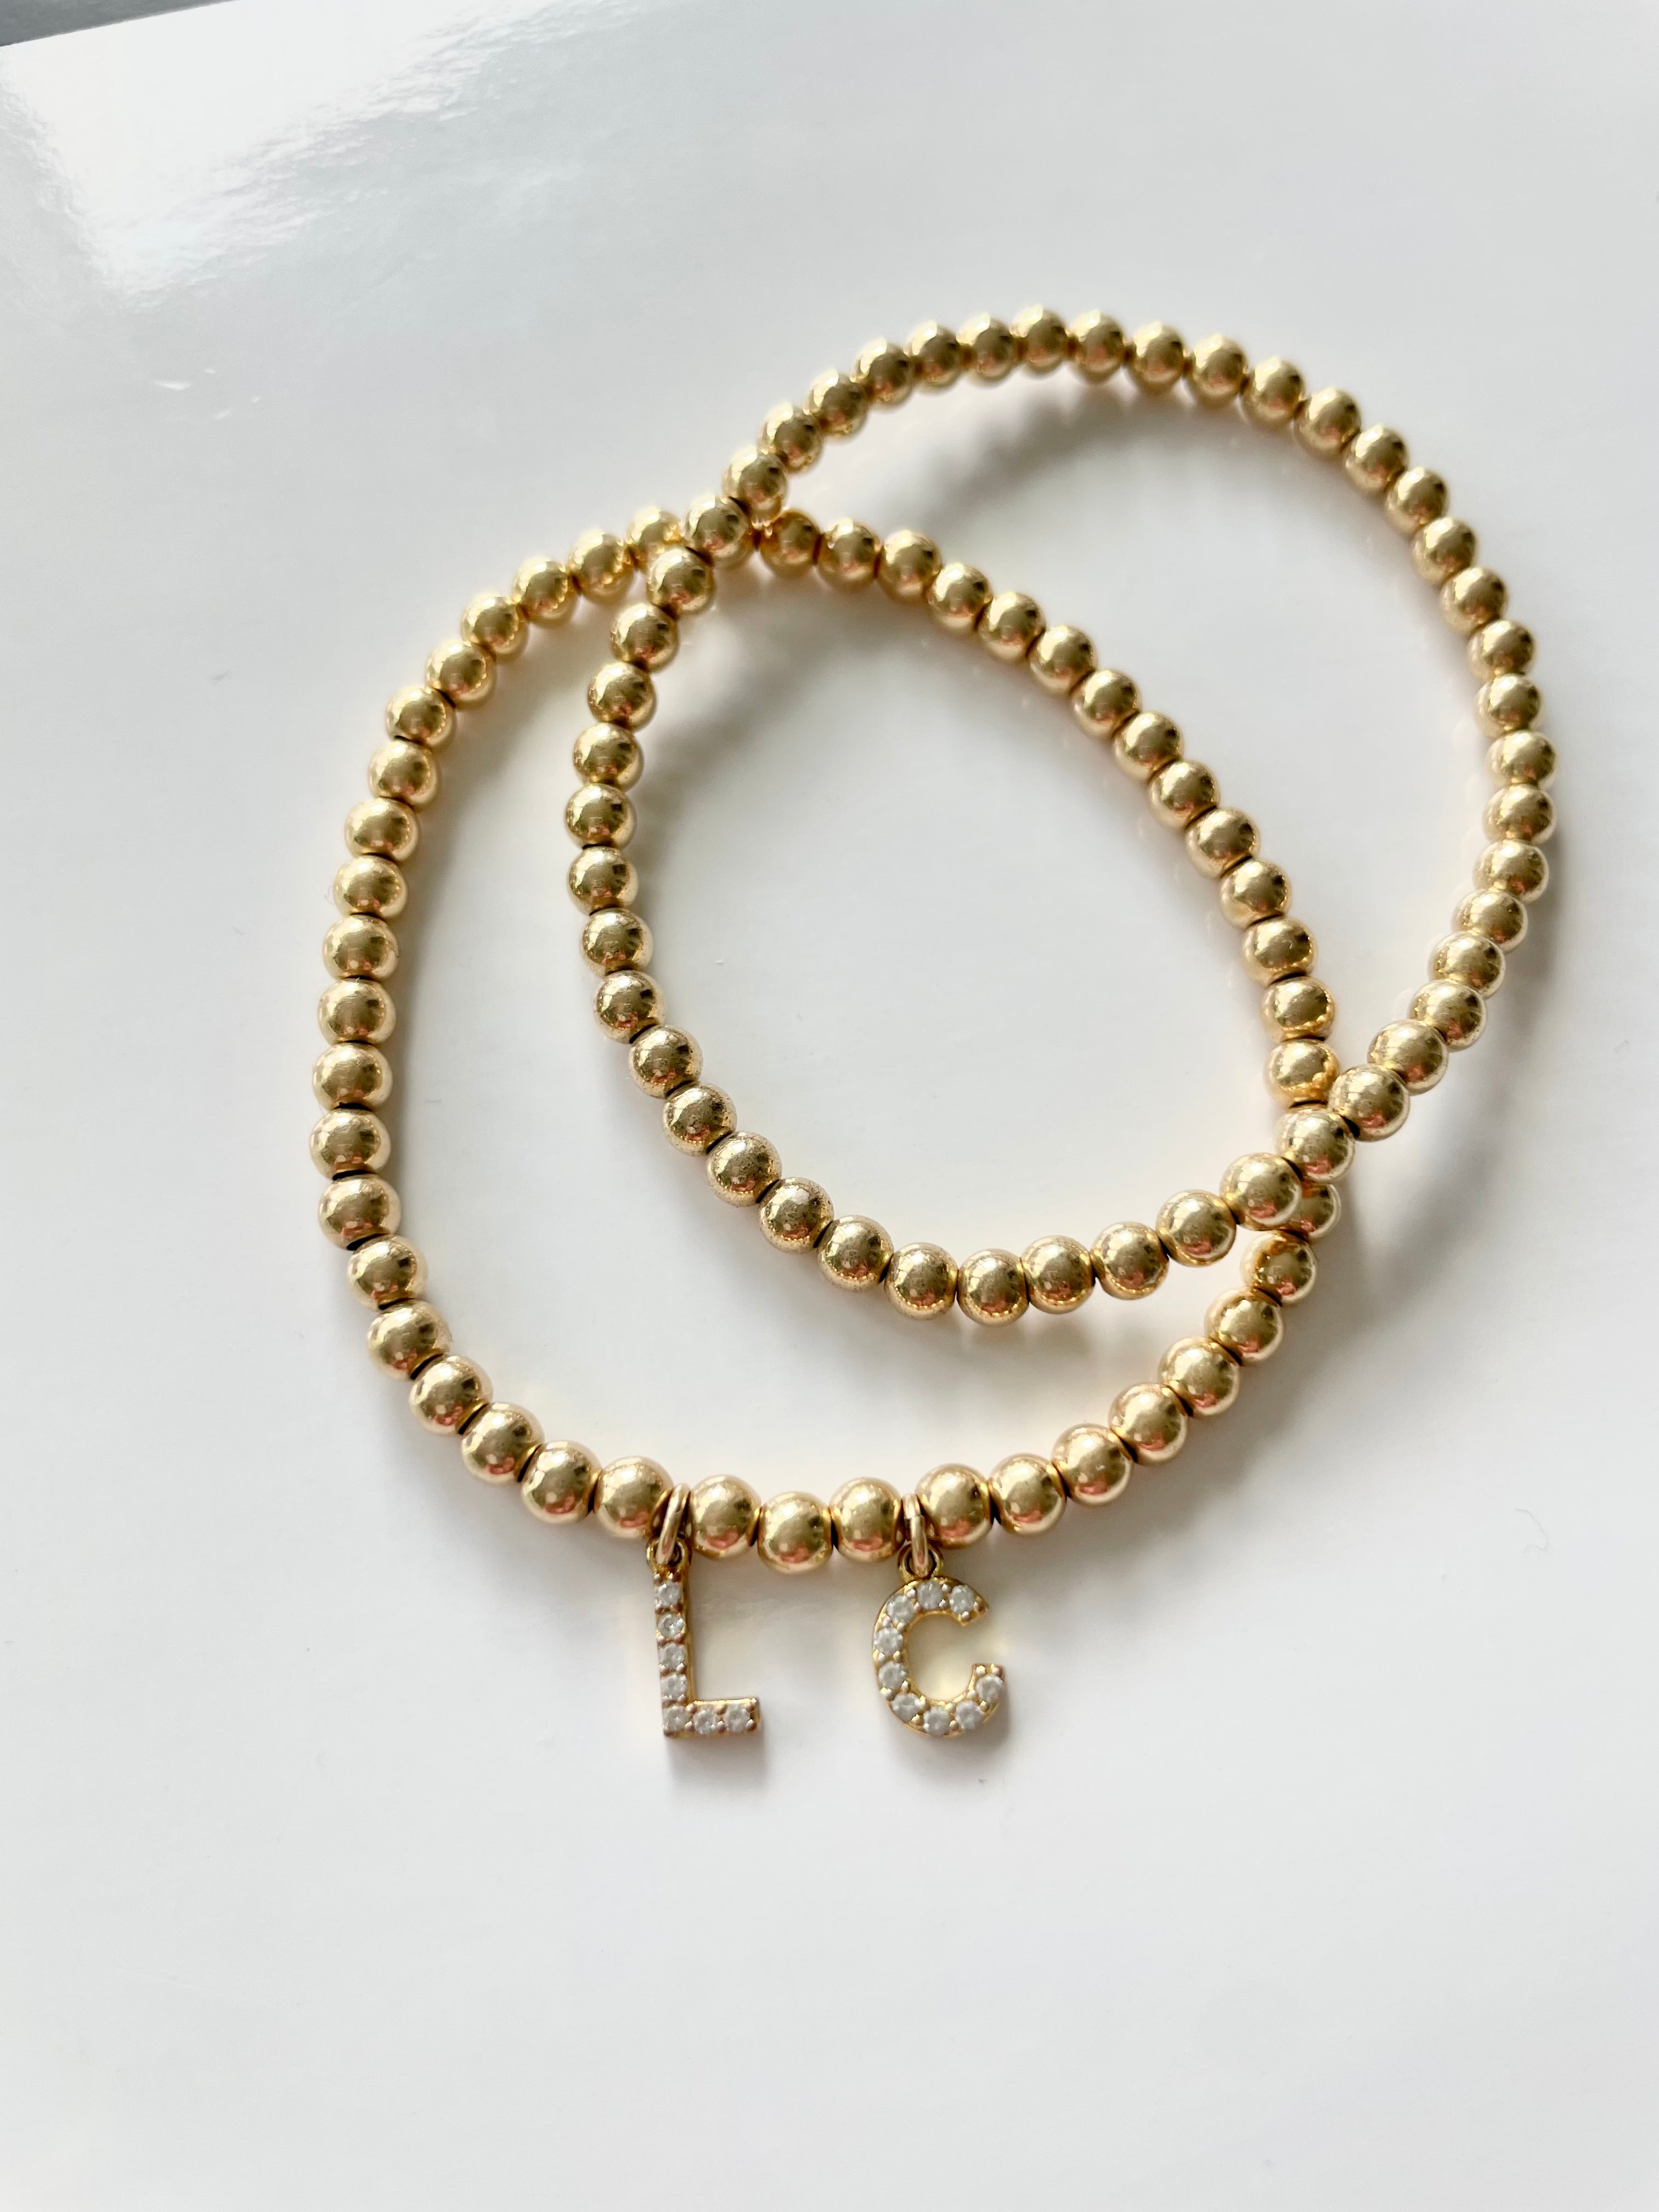 The LC Initial Bracelet